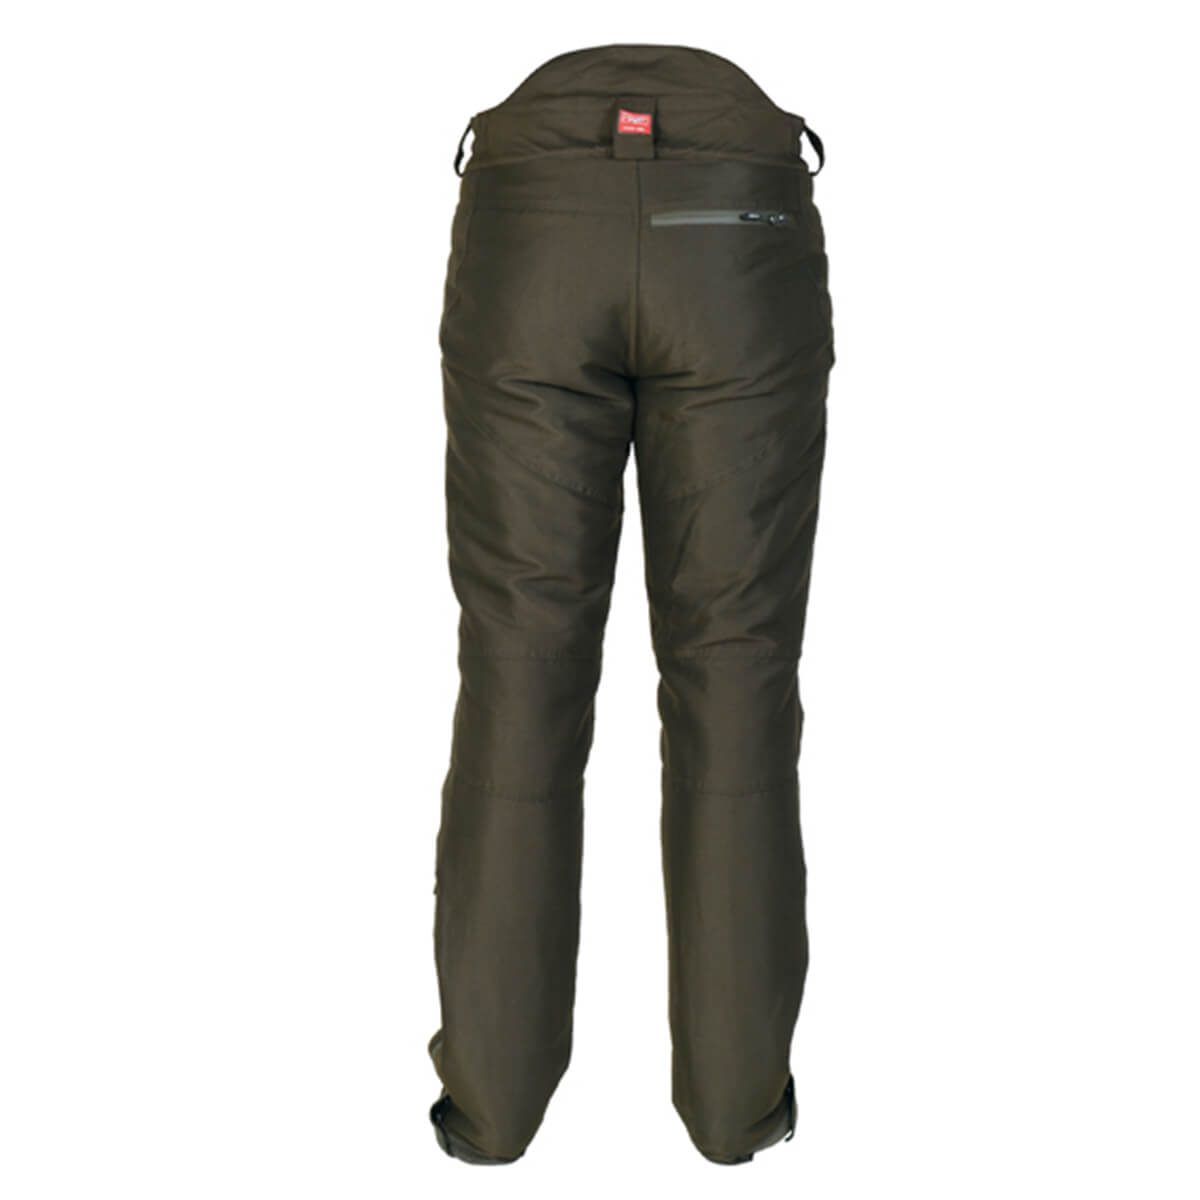 Hart winter trousers Altai-T